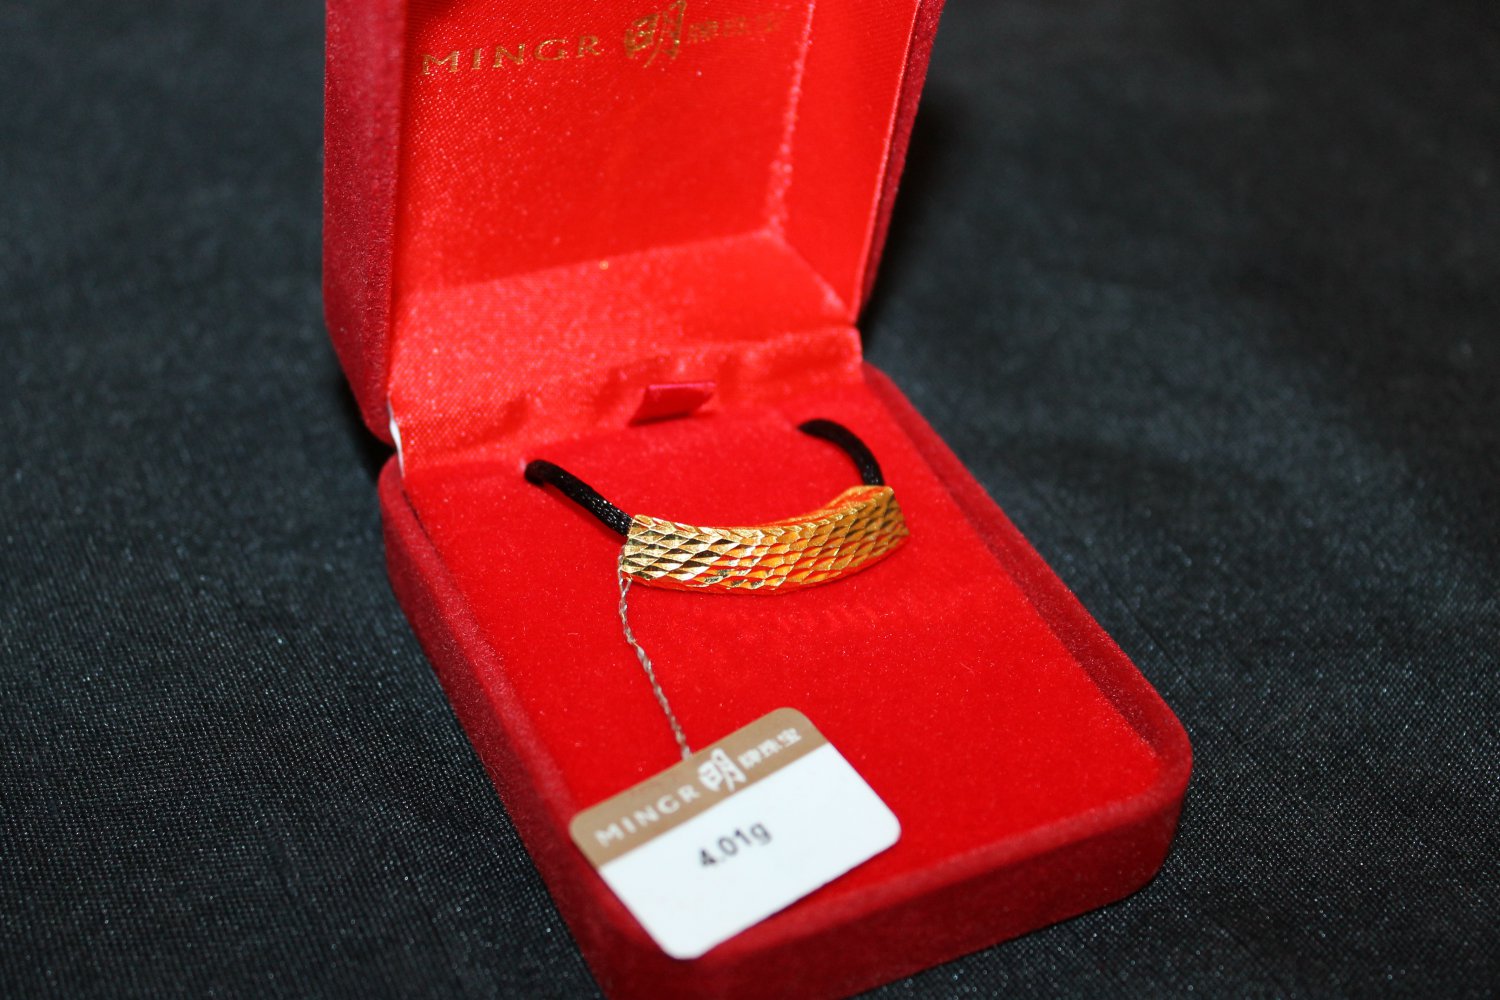 BRAND NEW 24k 24 k Pure Gold 999.9% gold Slide Pendant from China silk ...